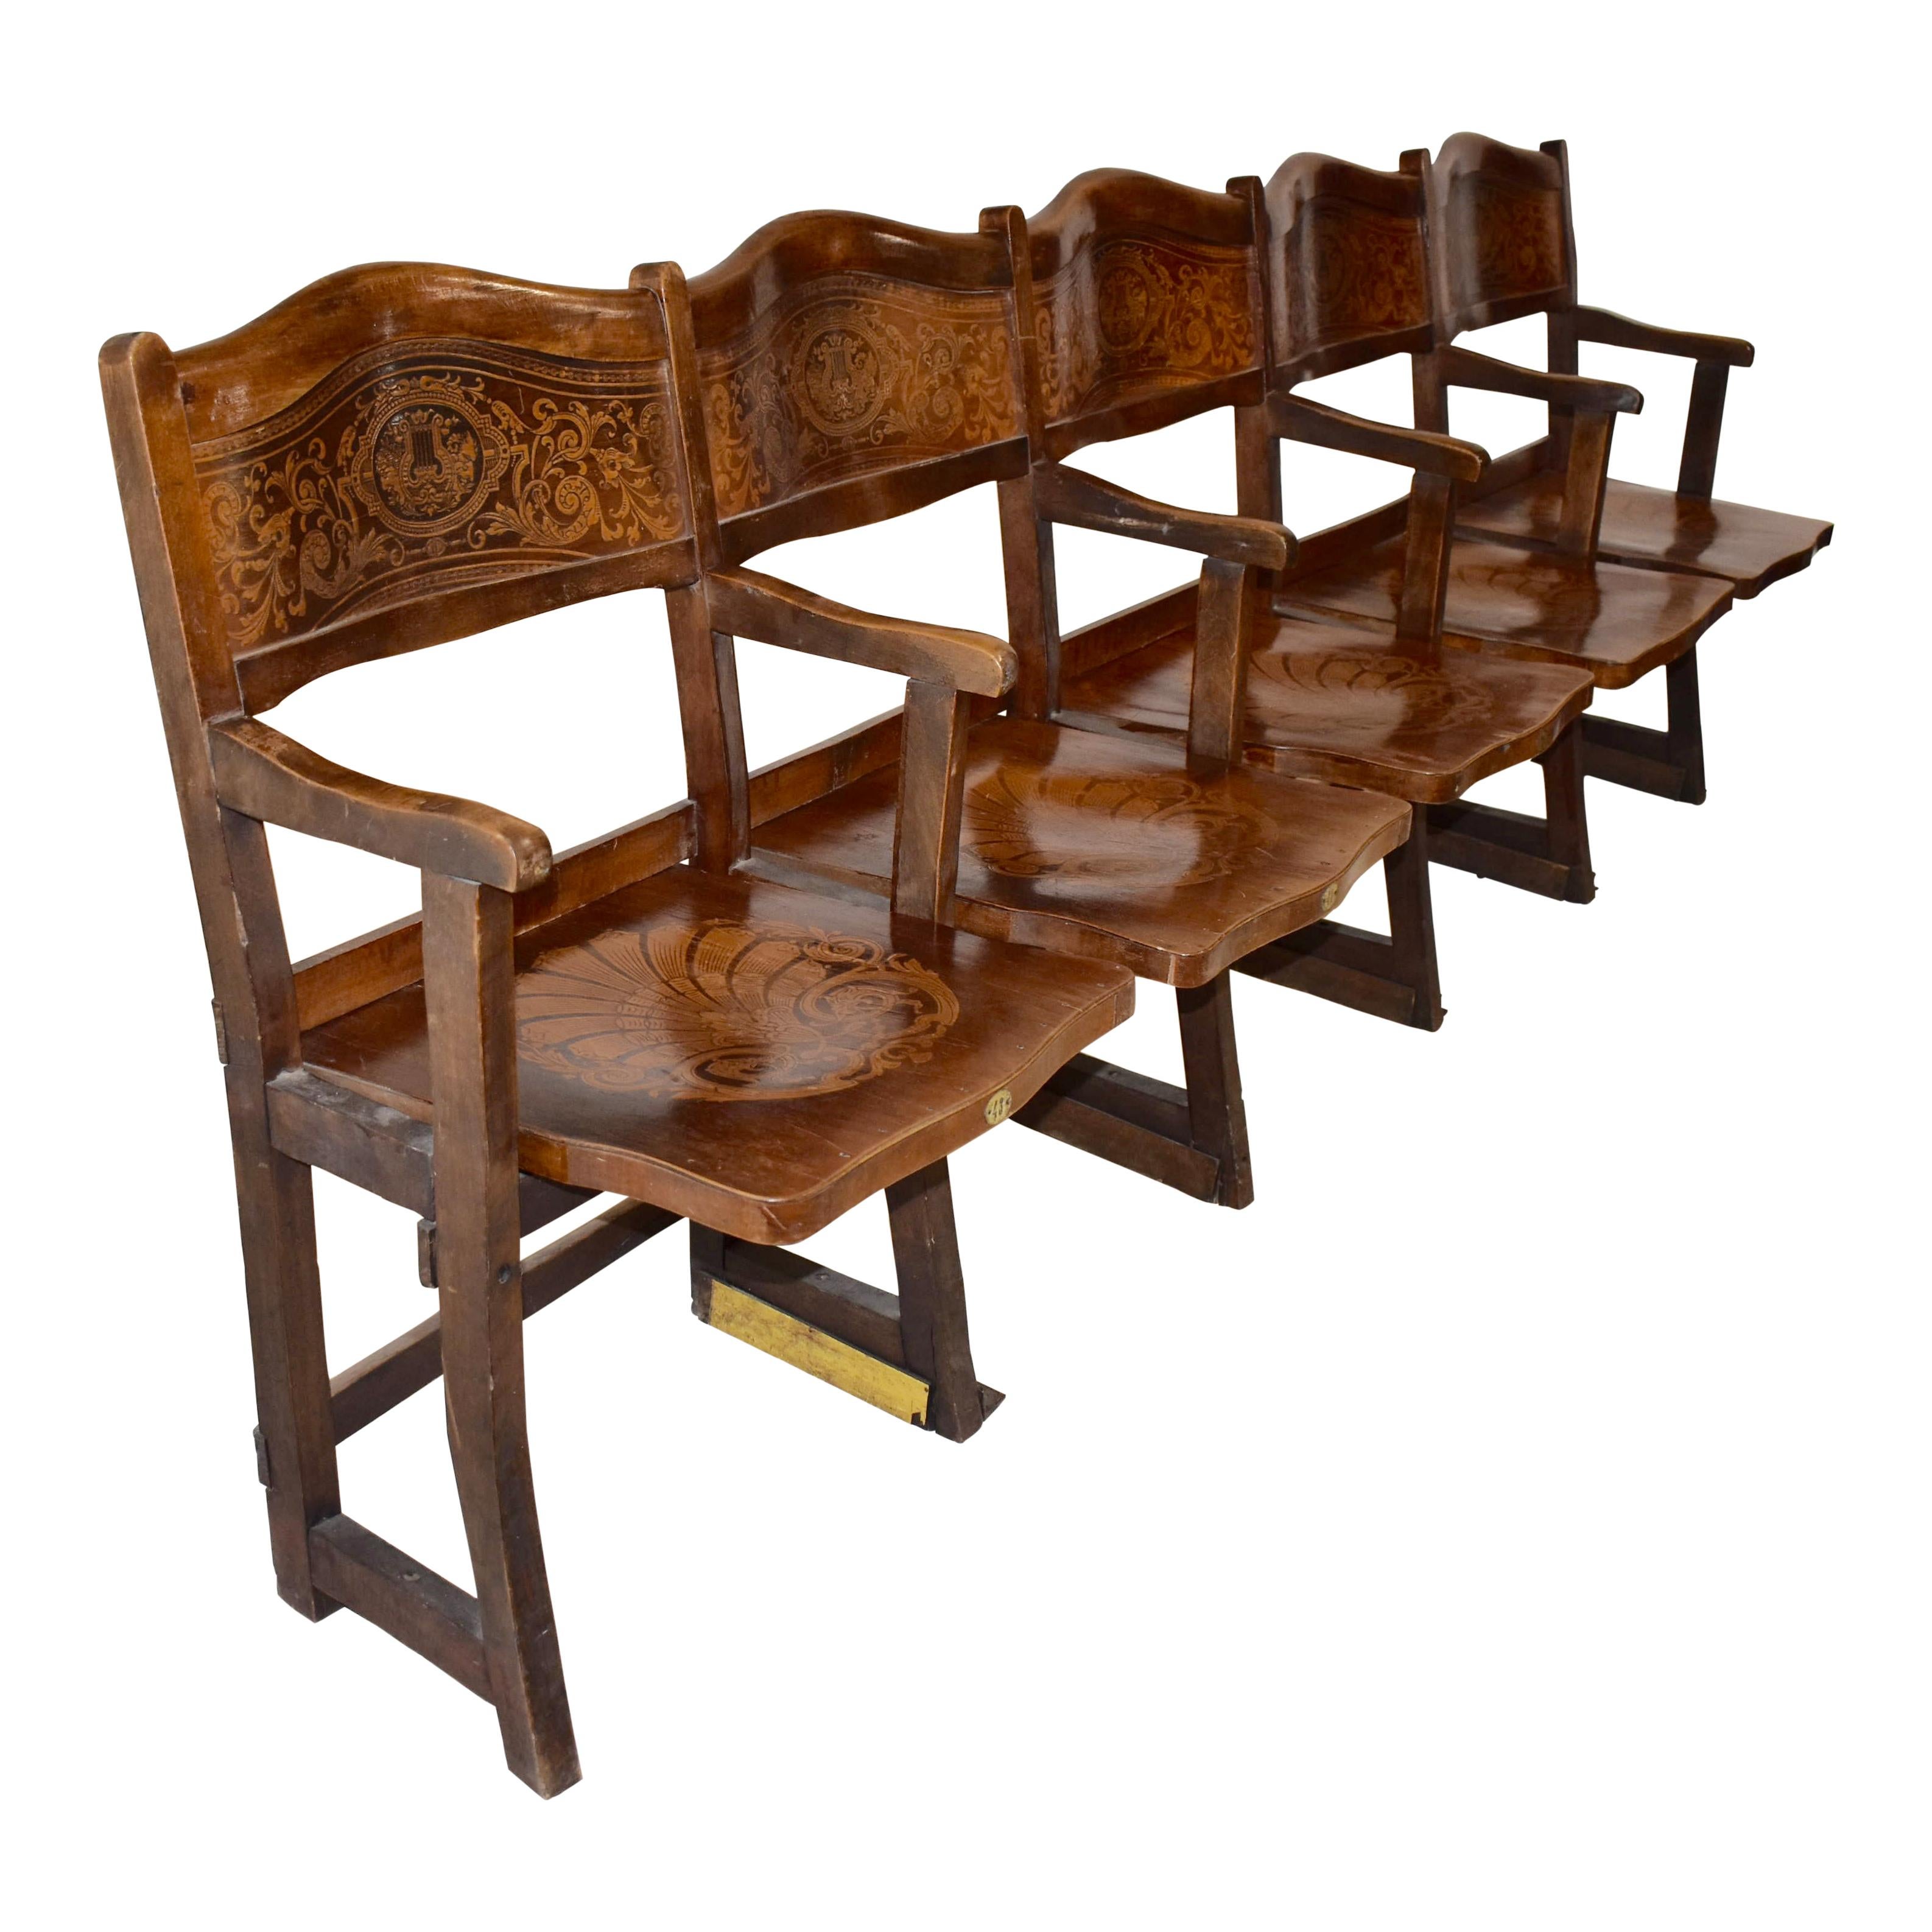 The rosewood and maple marquetry in the back rests and seats of this row of theatre seats from Belgium is exquisite. All five flip-down seats are back waited, which brings the seats to their upright position. We have seen many wood theatre seats in